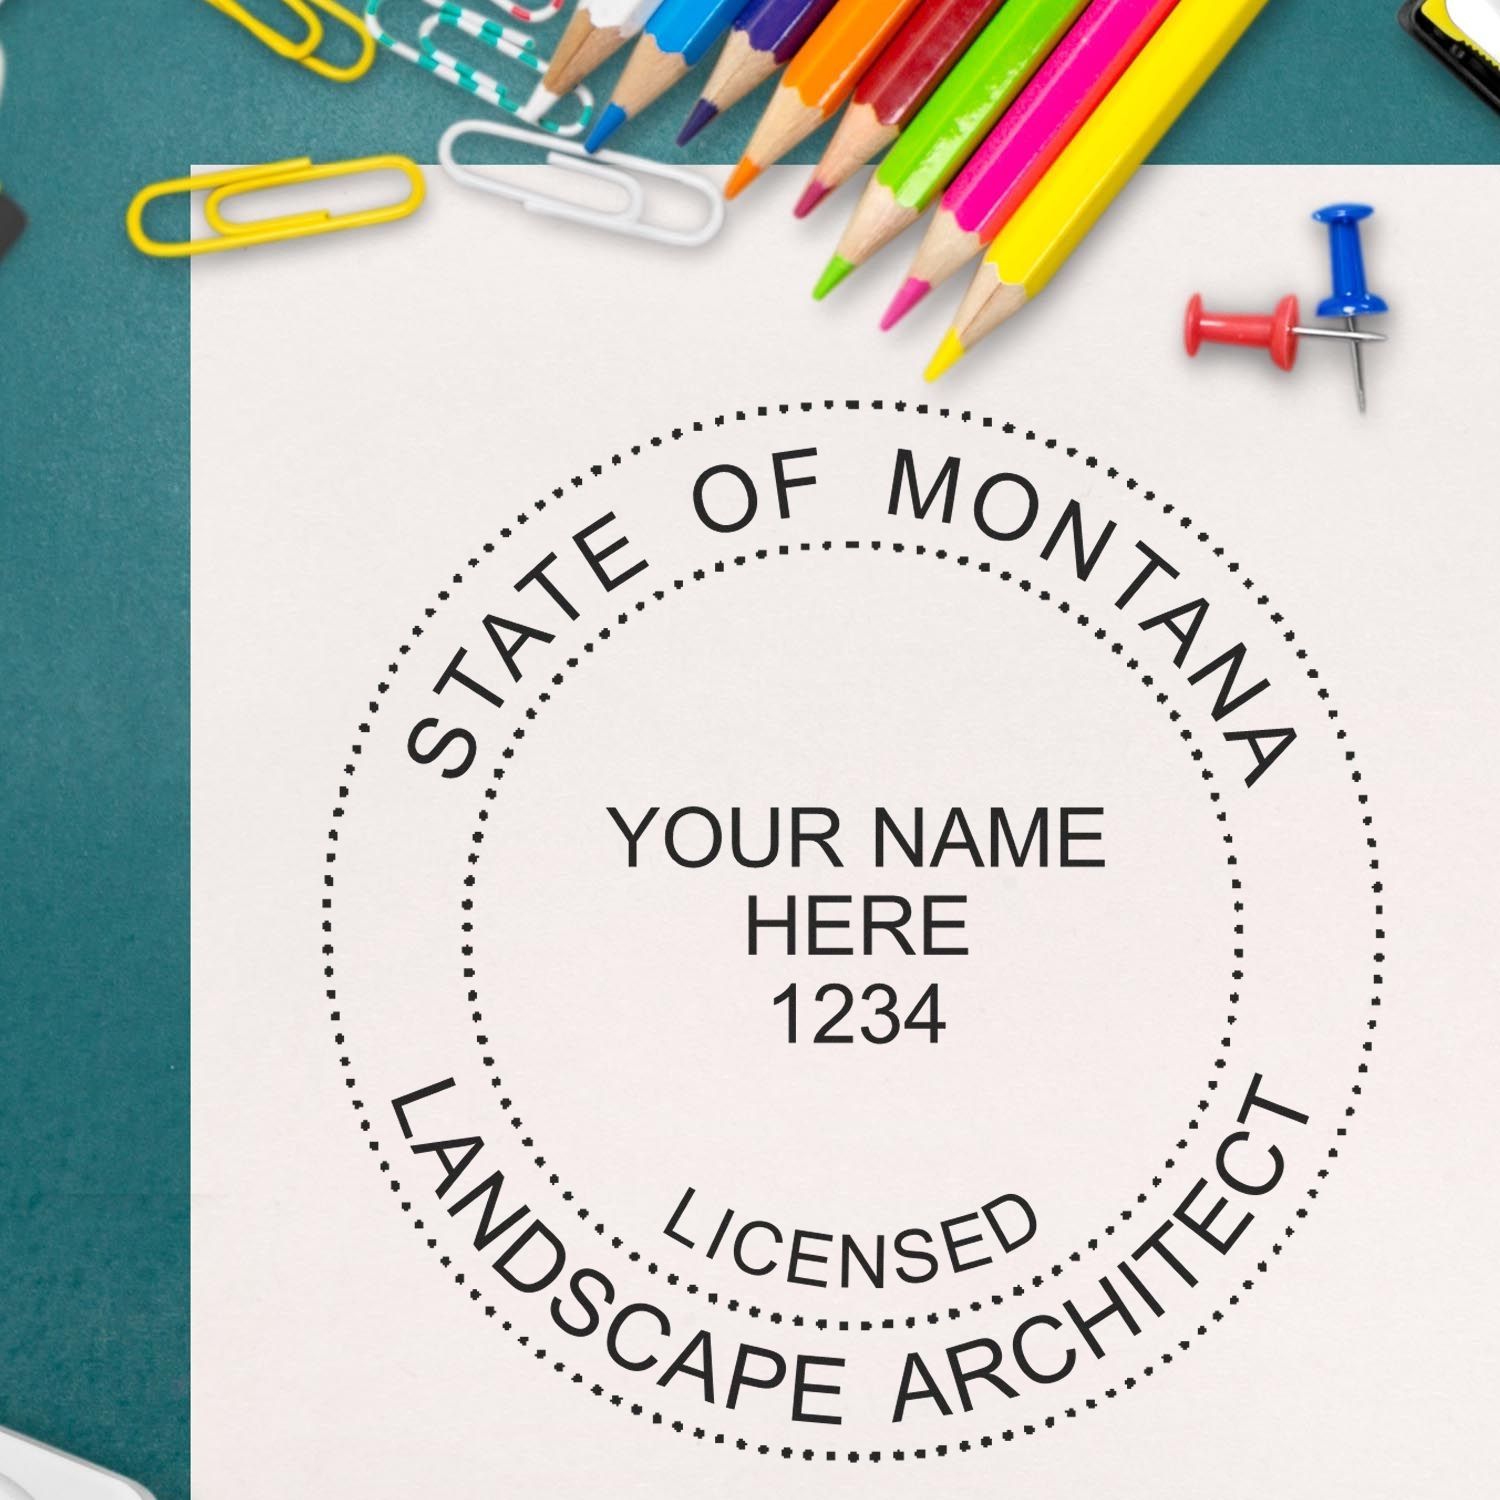 The main image for the Self-Inking Montana Landscape Architect Stamp depicting a sample of the imprint and electronic files